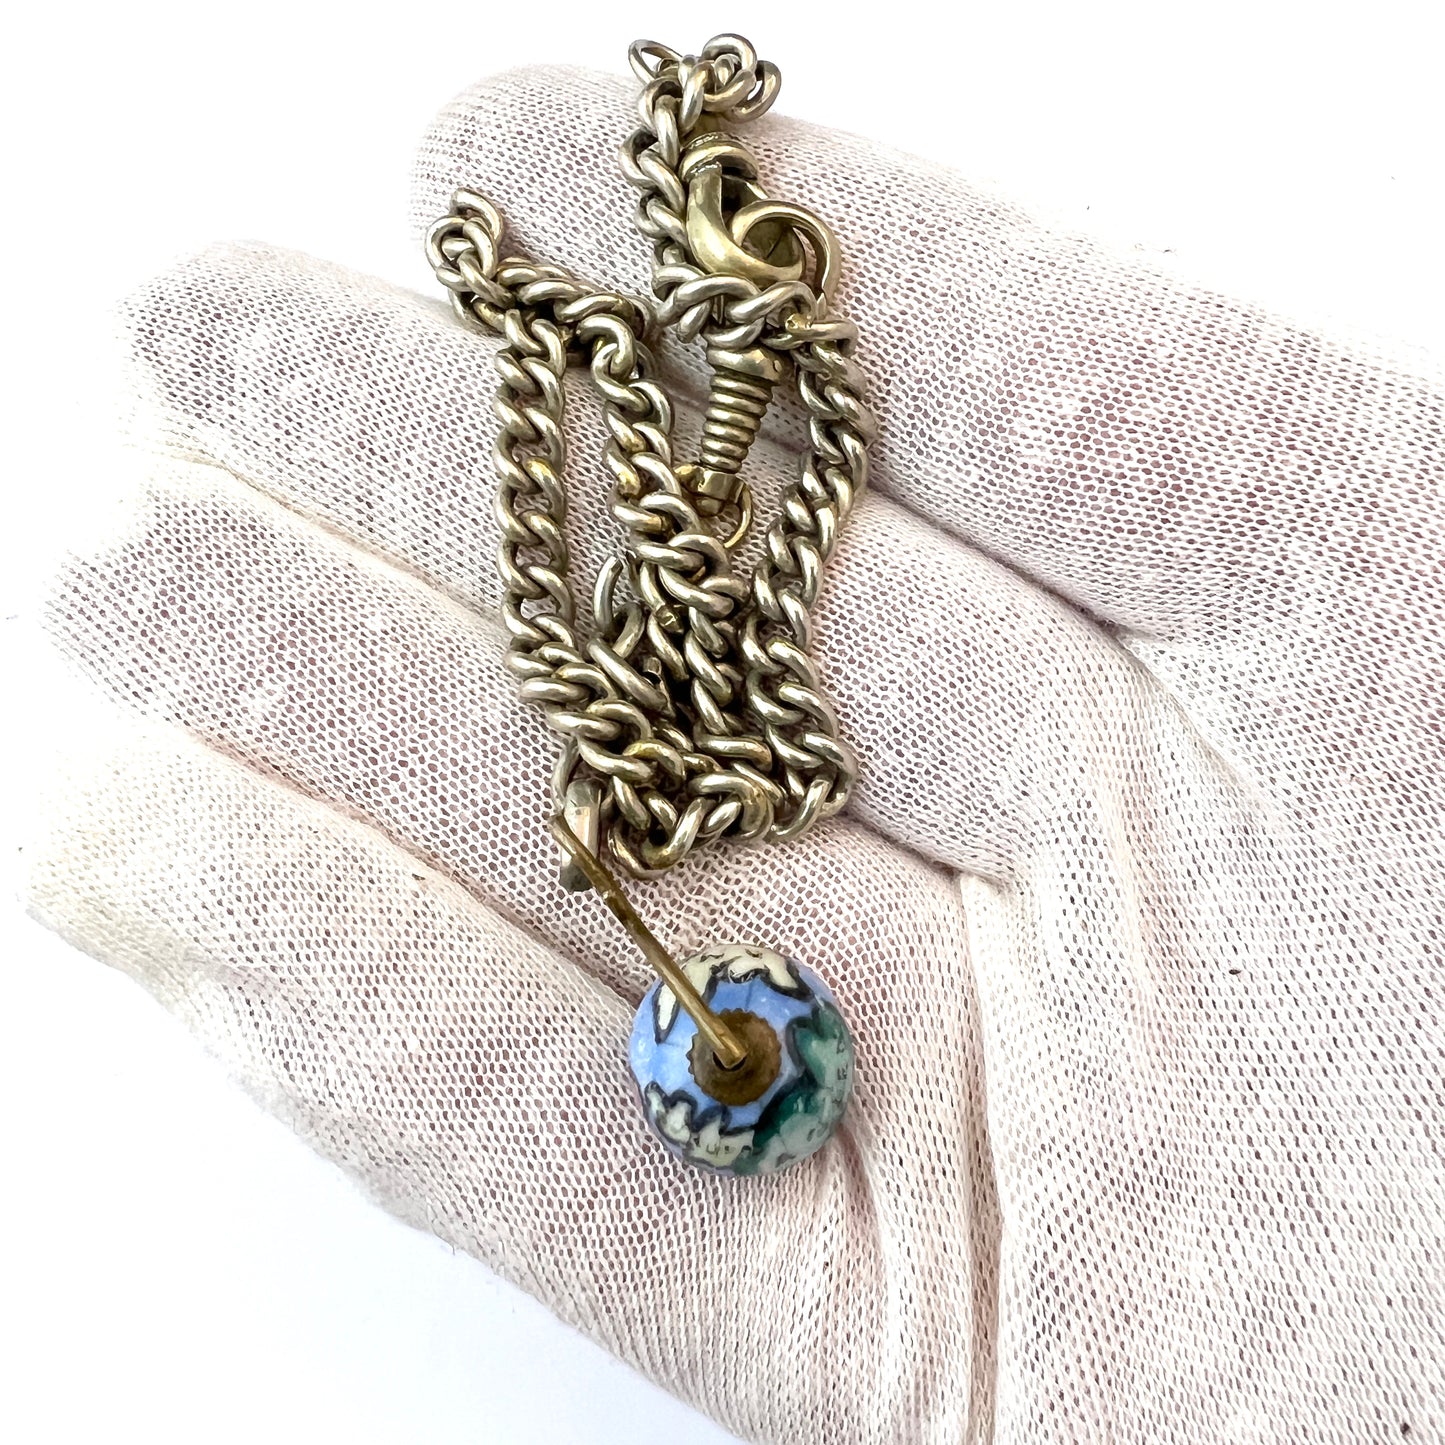 Antique Silver Plated Watch Chain With Enamel Globe Fob.